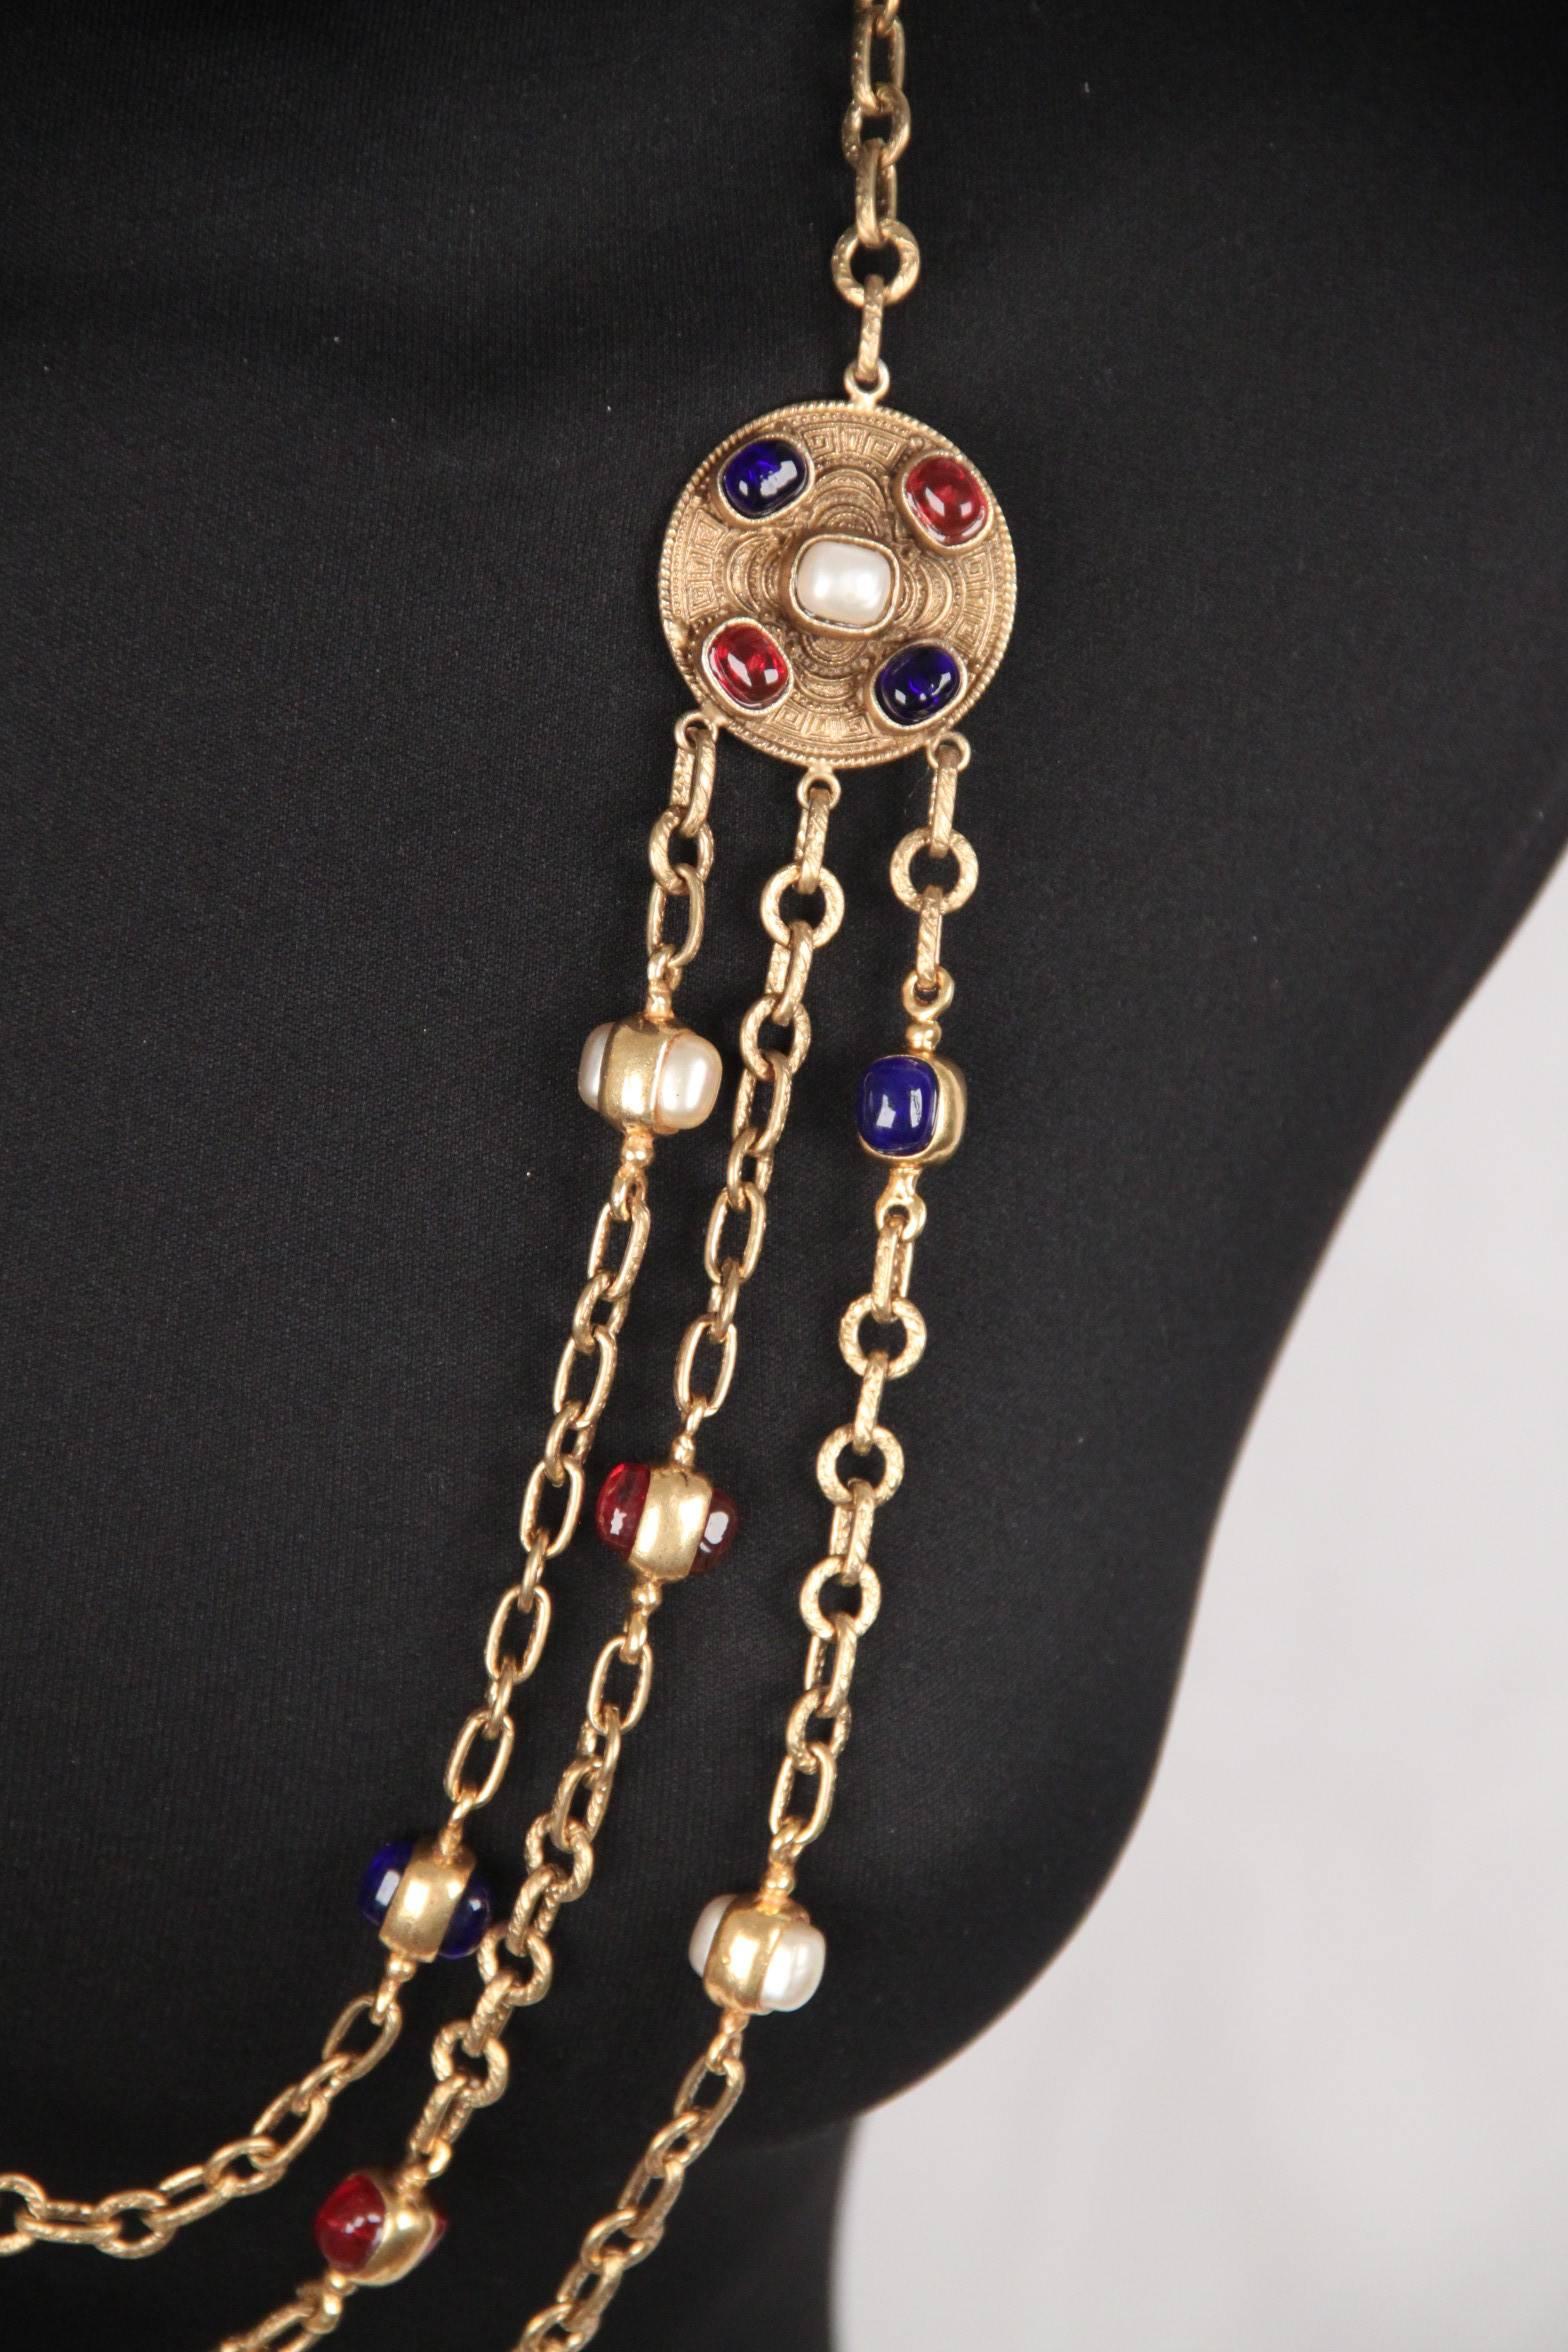 - Classic Vintage Chanel triple row chain necklace the 1984 
- Gold metal 3 rows chain decorated with blue, red and pearl-look double-sided glass paste cabochons
- Features 2 chiseled medallion decorated with glass paste cabochons in the same